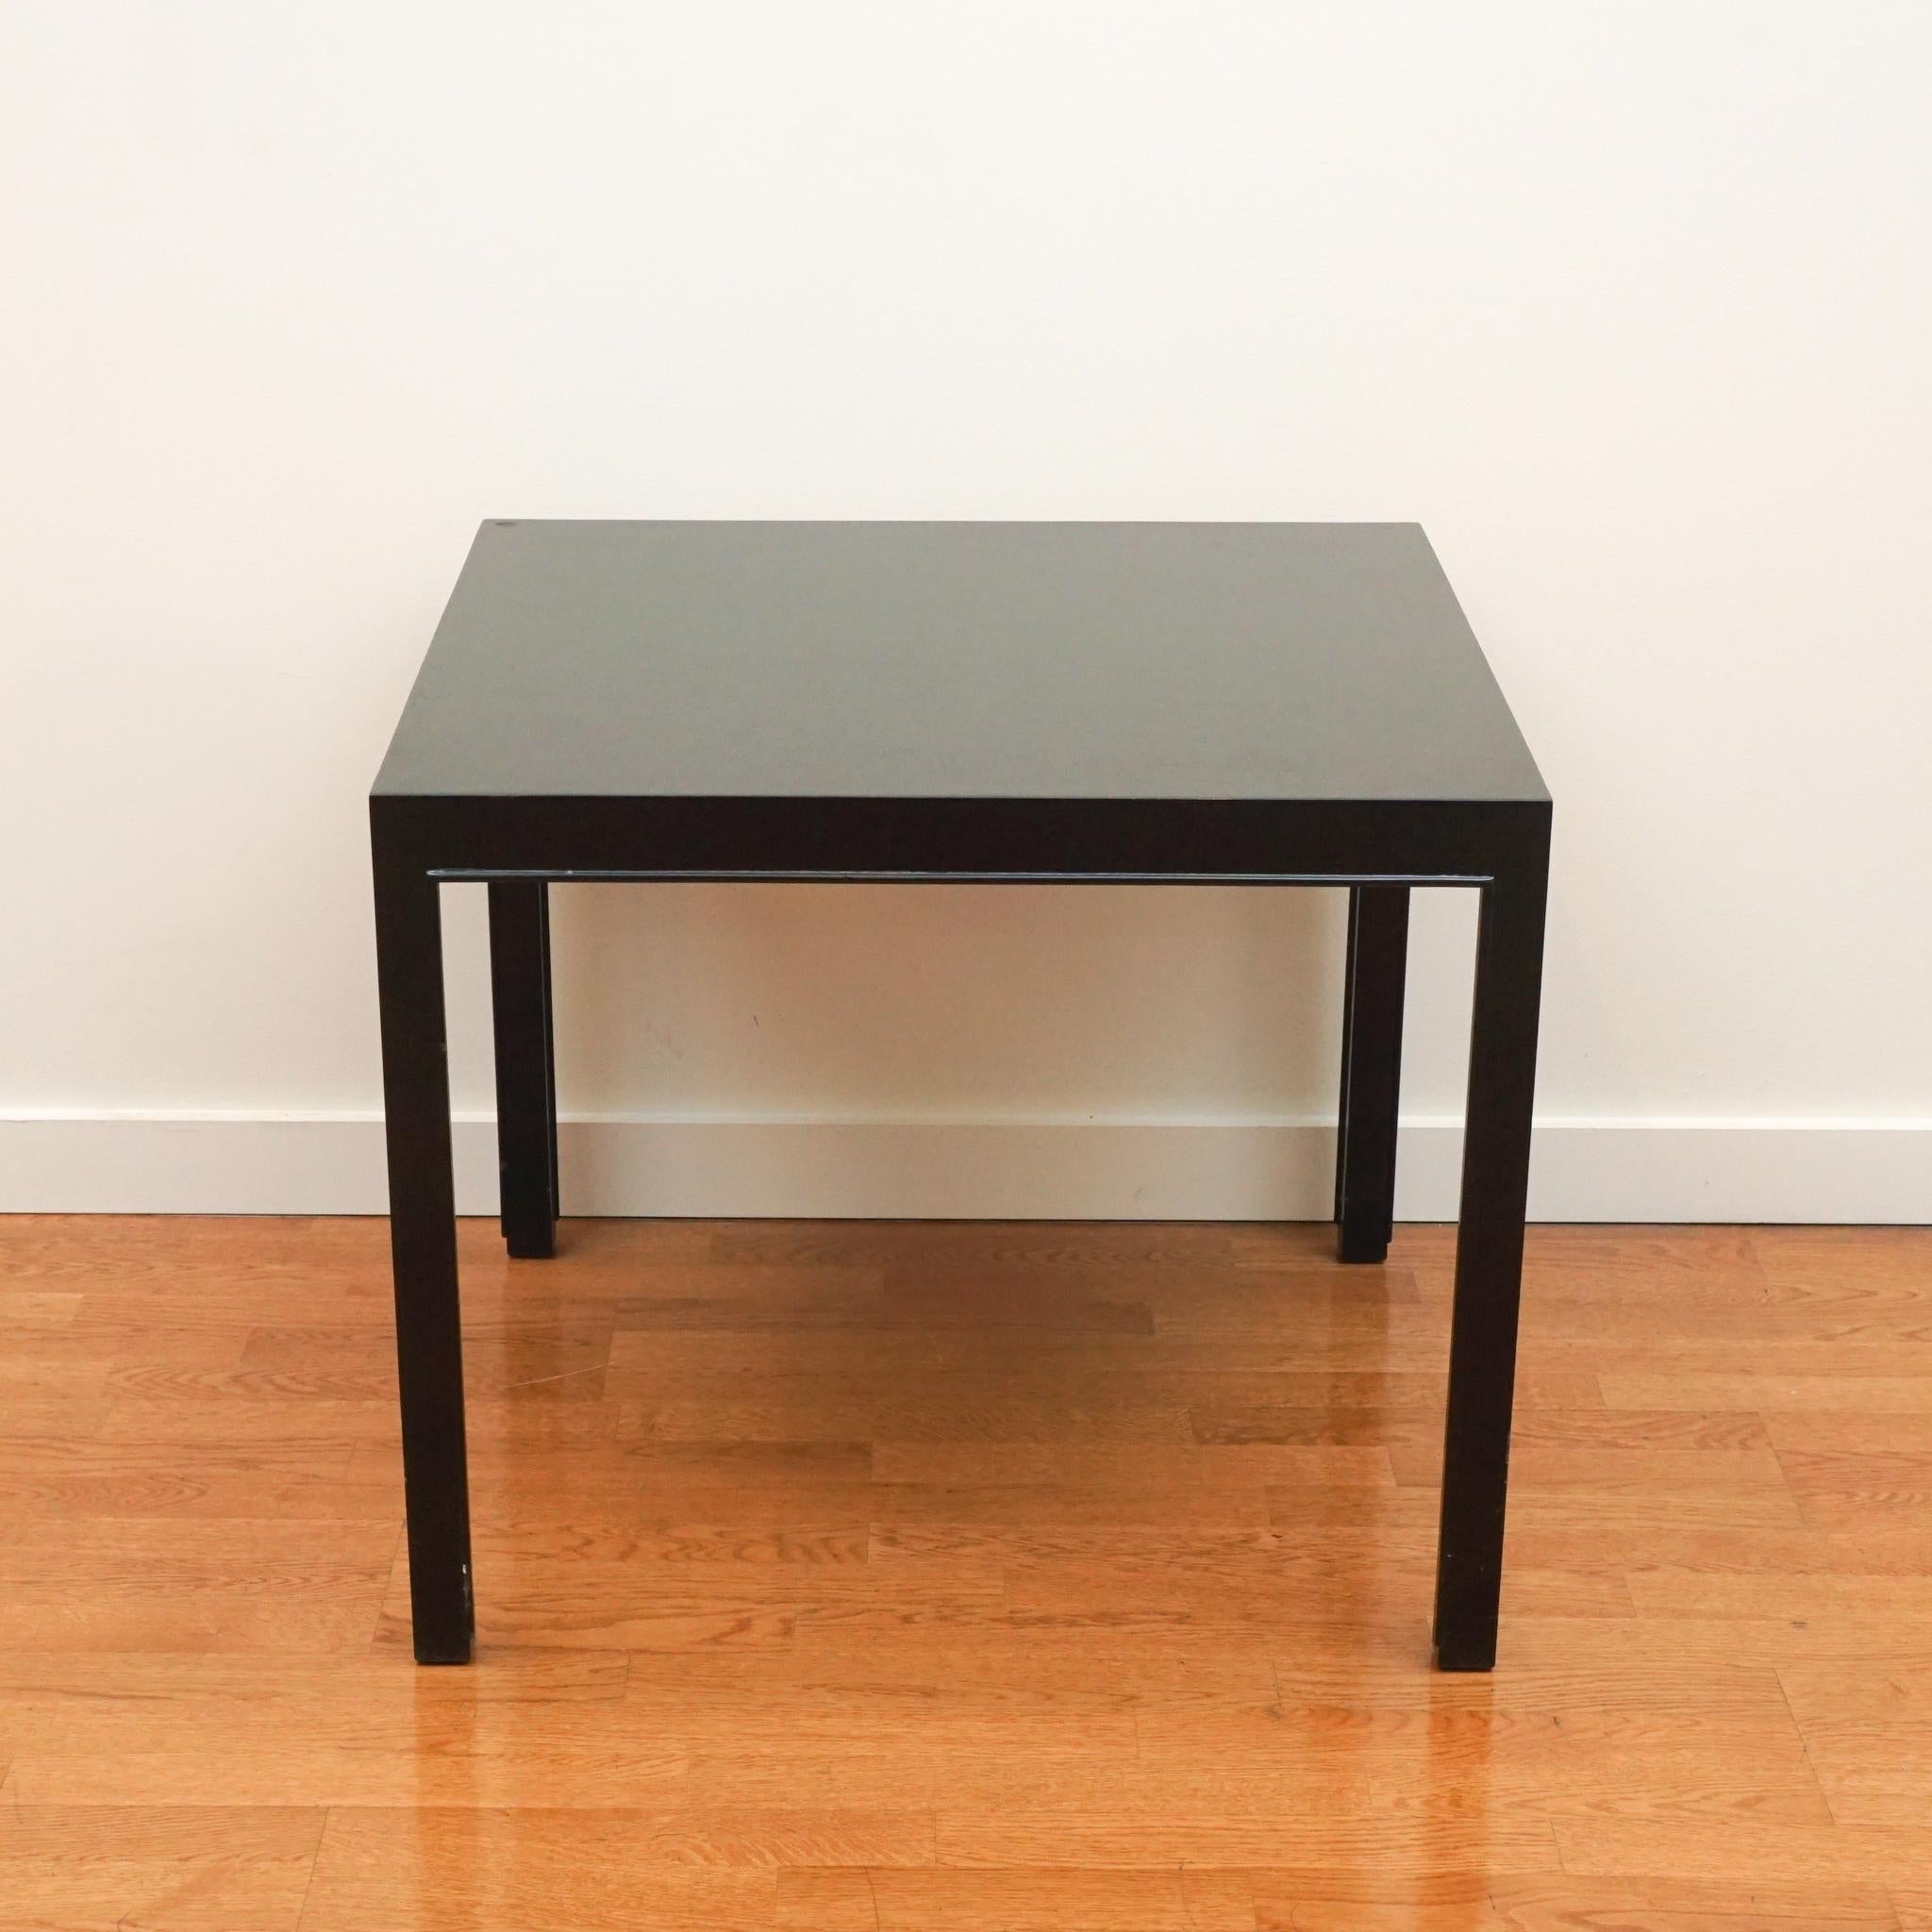 Simple lines and classic proportions make this square side table classic Dunbar. Made in the 1960s by the Indiana-based Dunbar Furniture company, the table is made of hardwood and finished in an ebony lacquer. The table bears the metal Dunbar marker